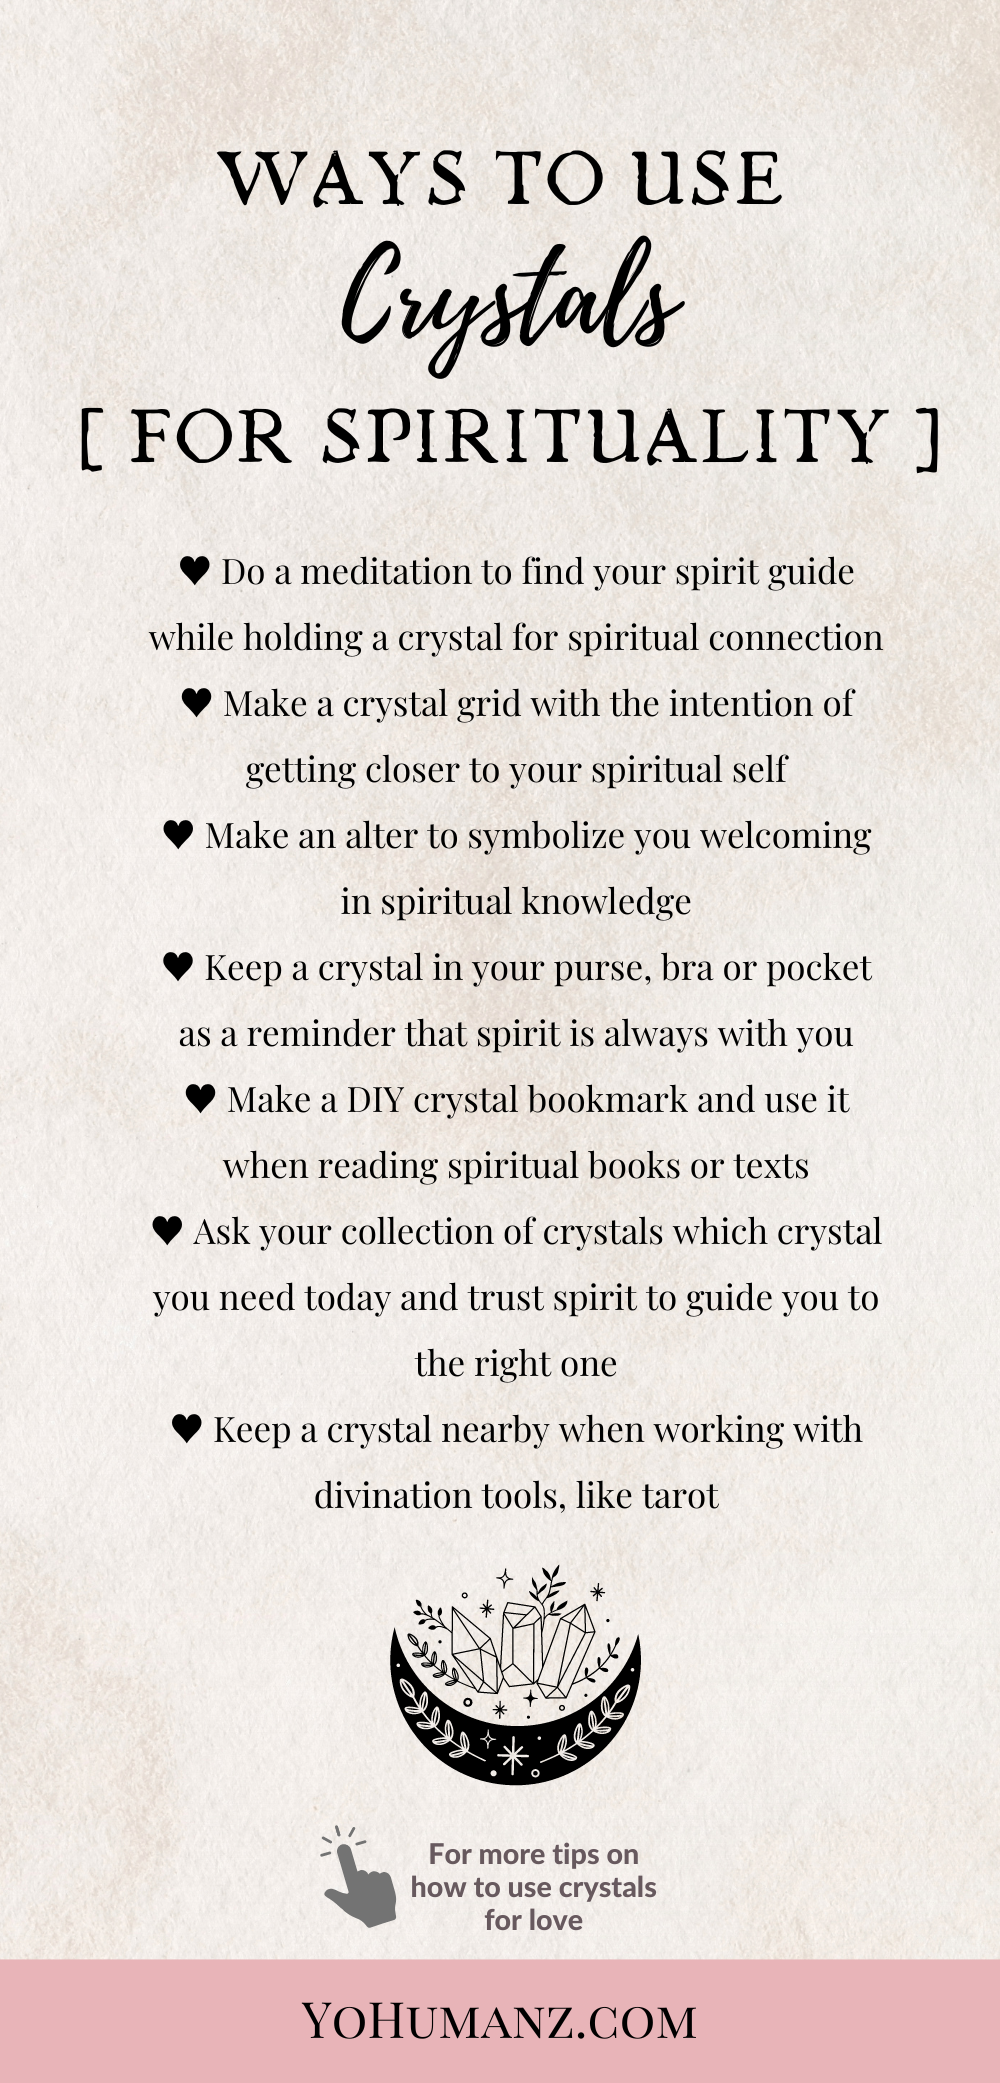 how to use crystals for spirituality